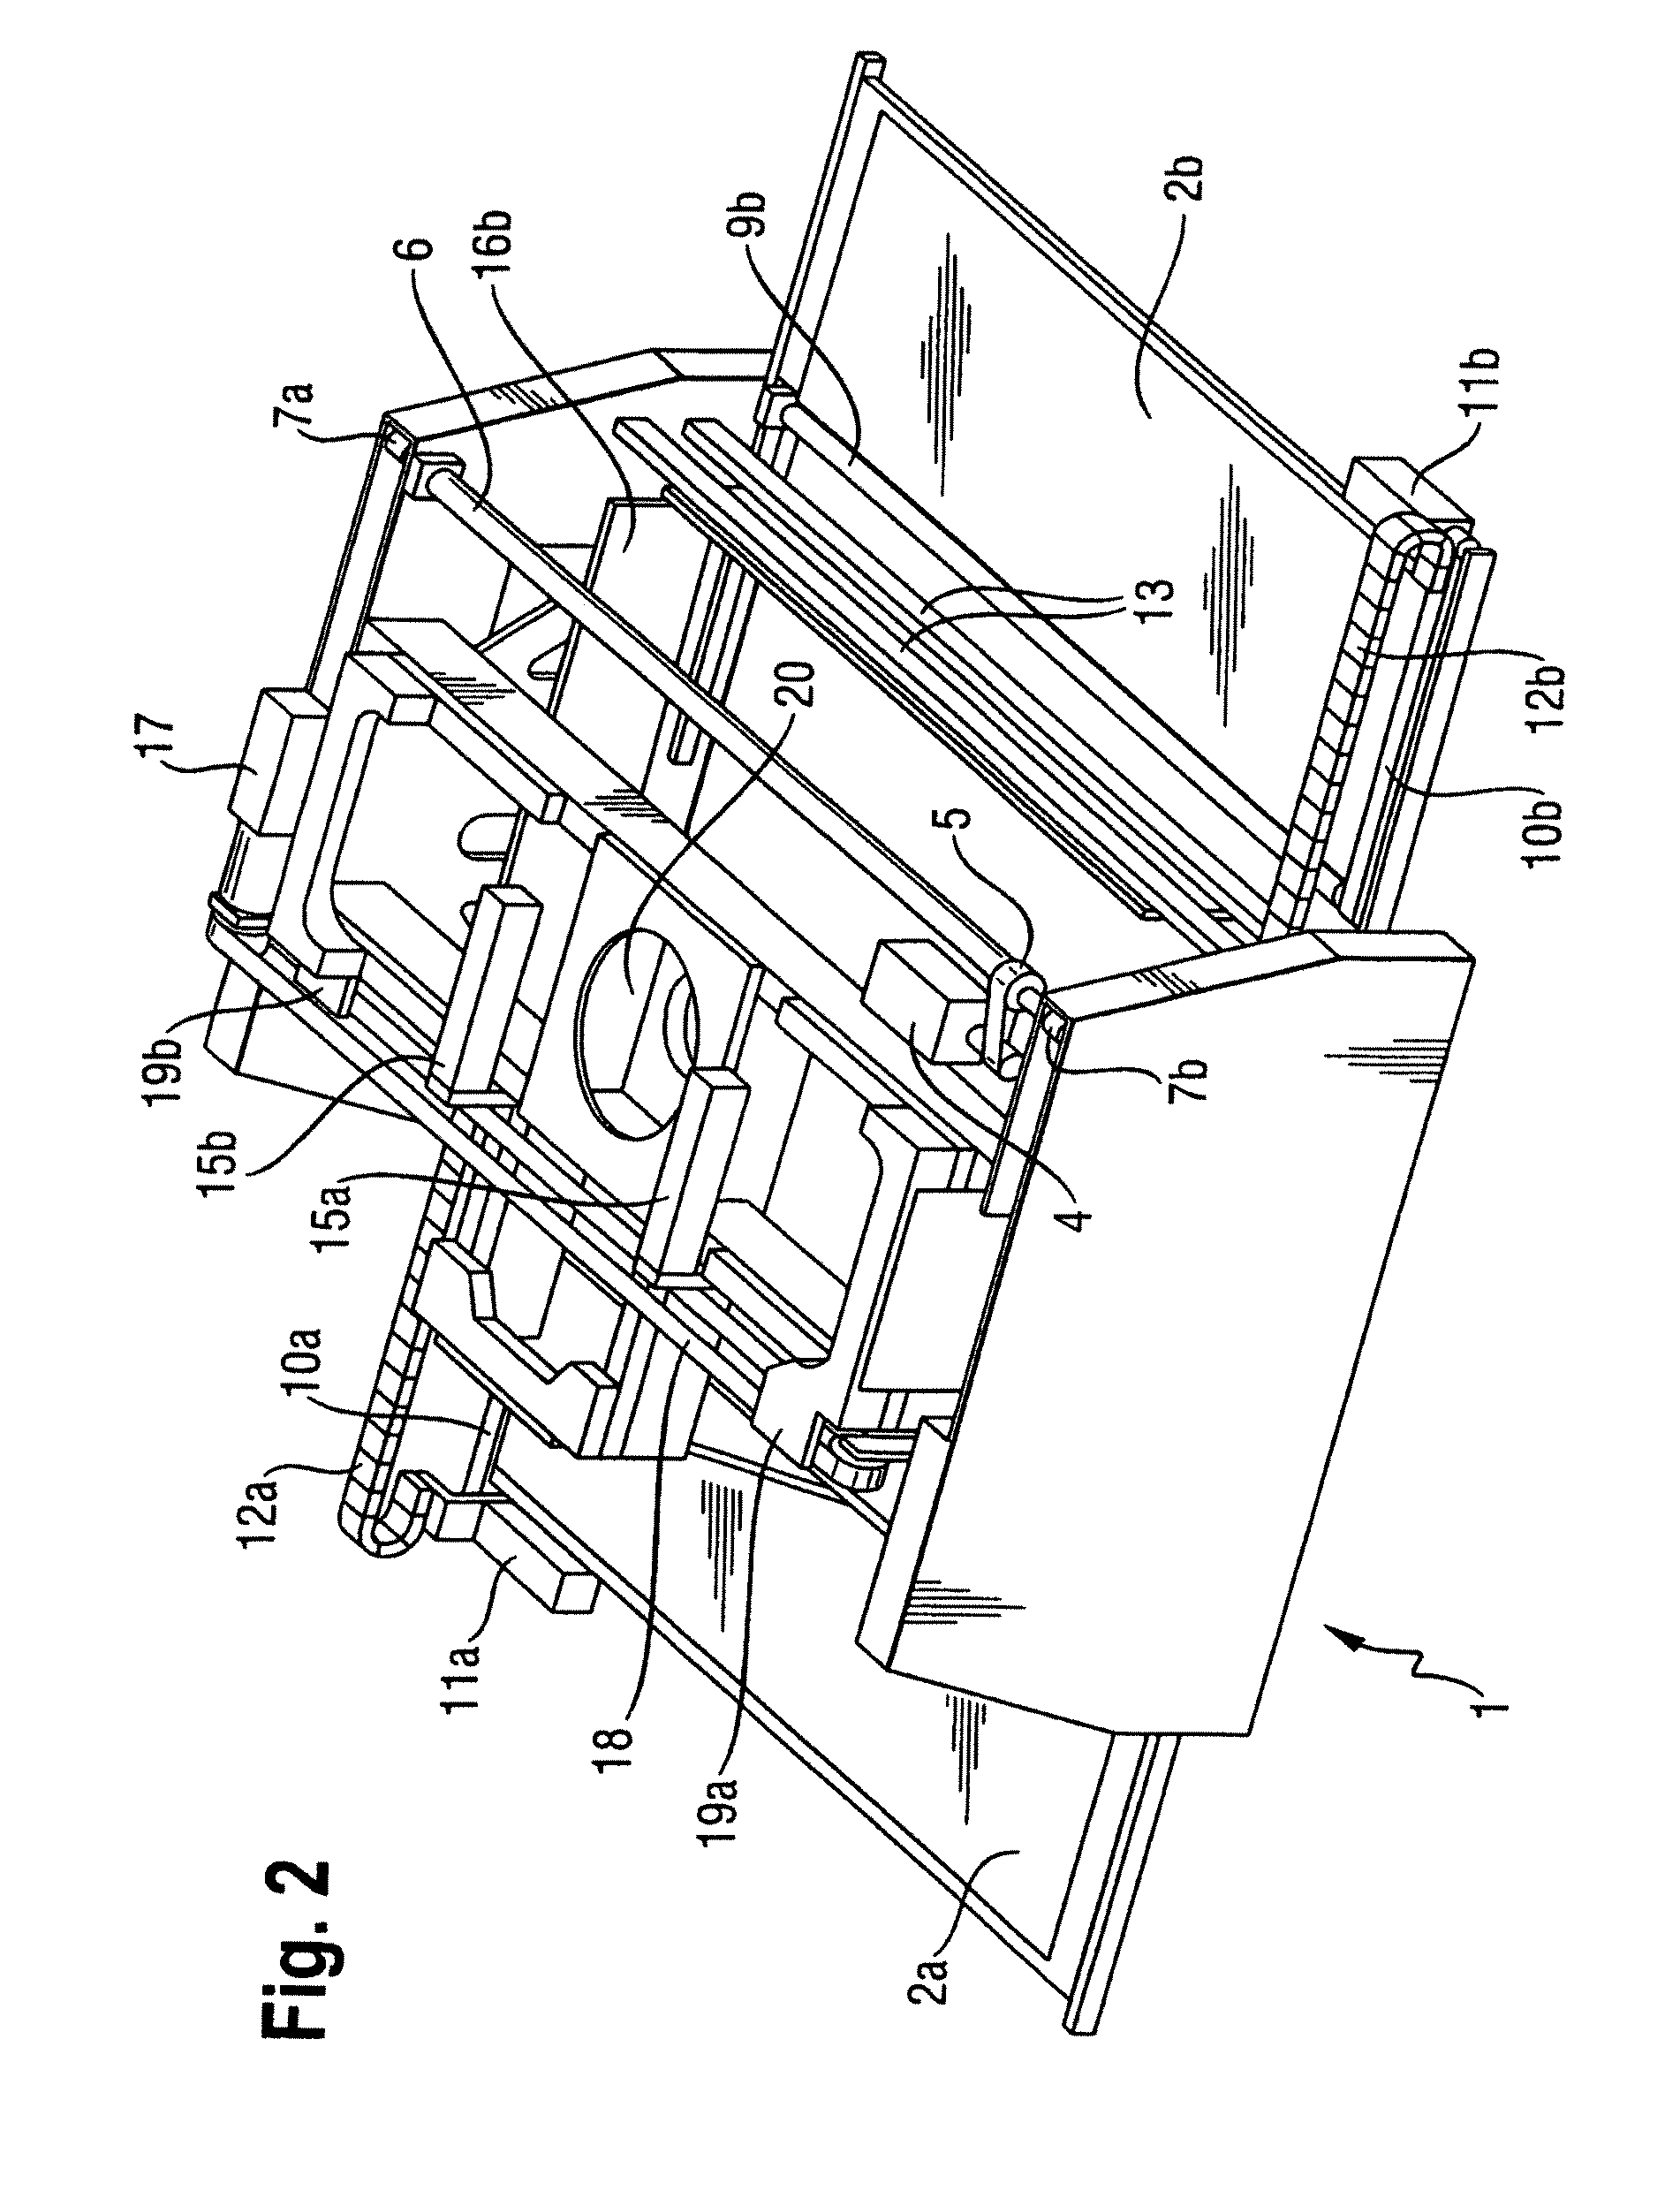 Device and method for depalletizing stacked bundles